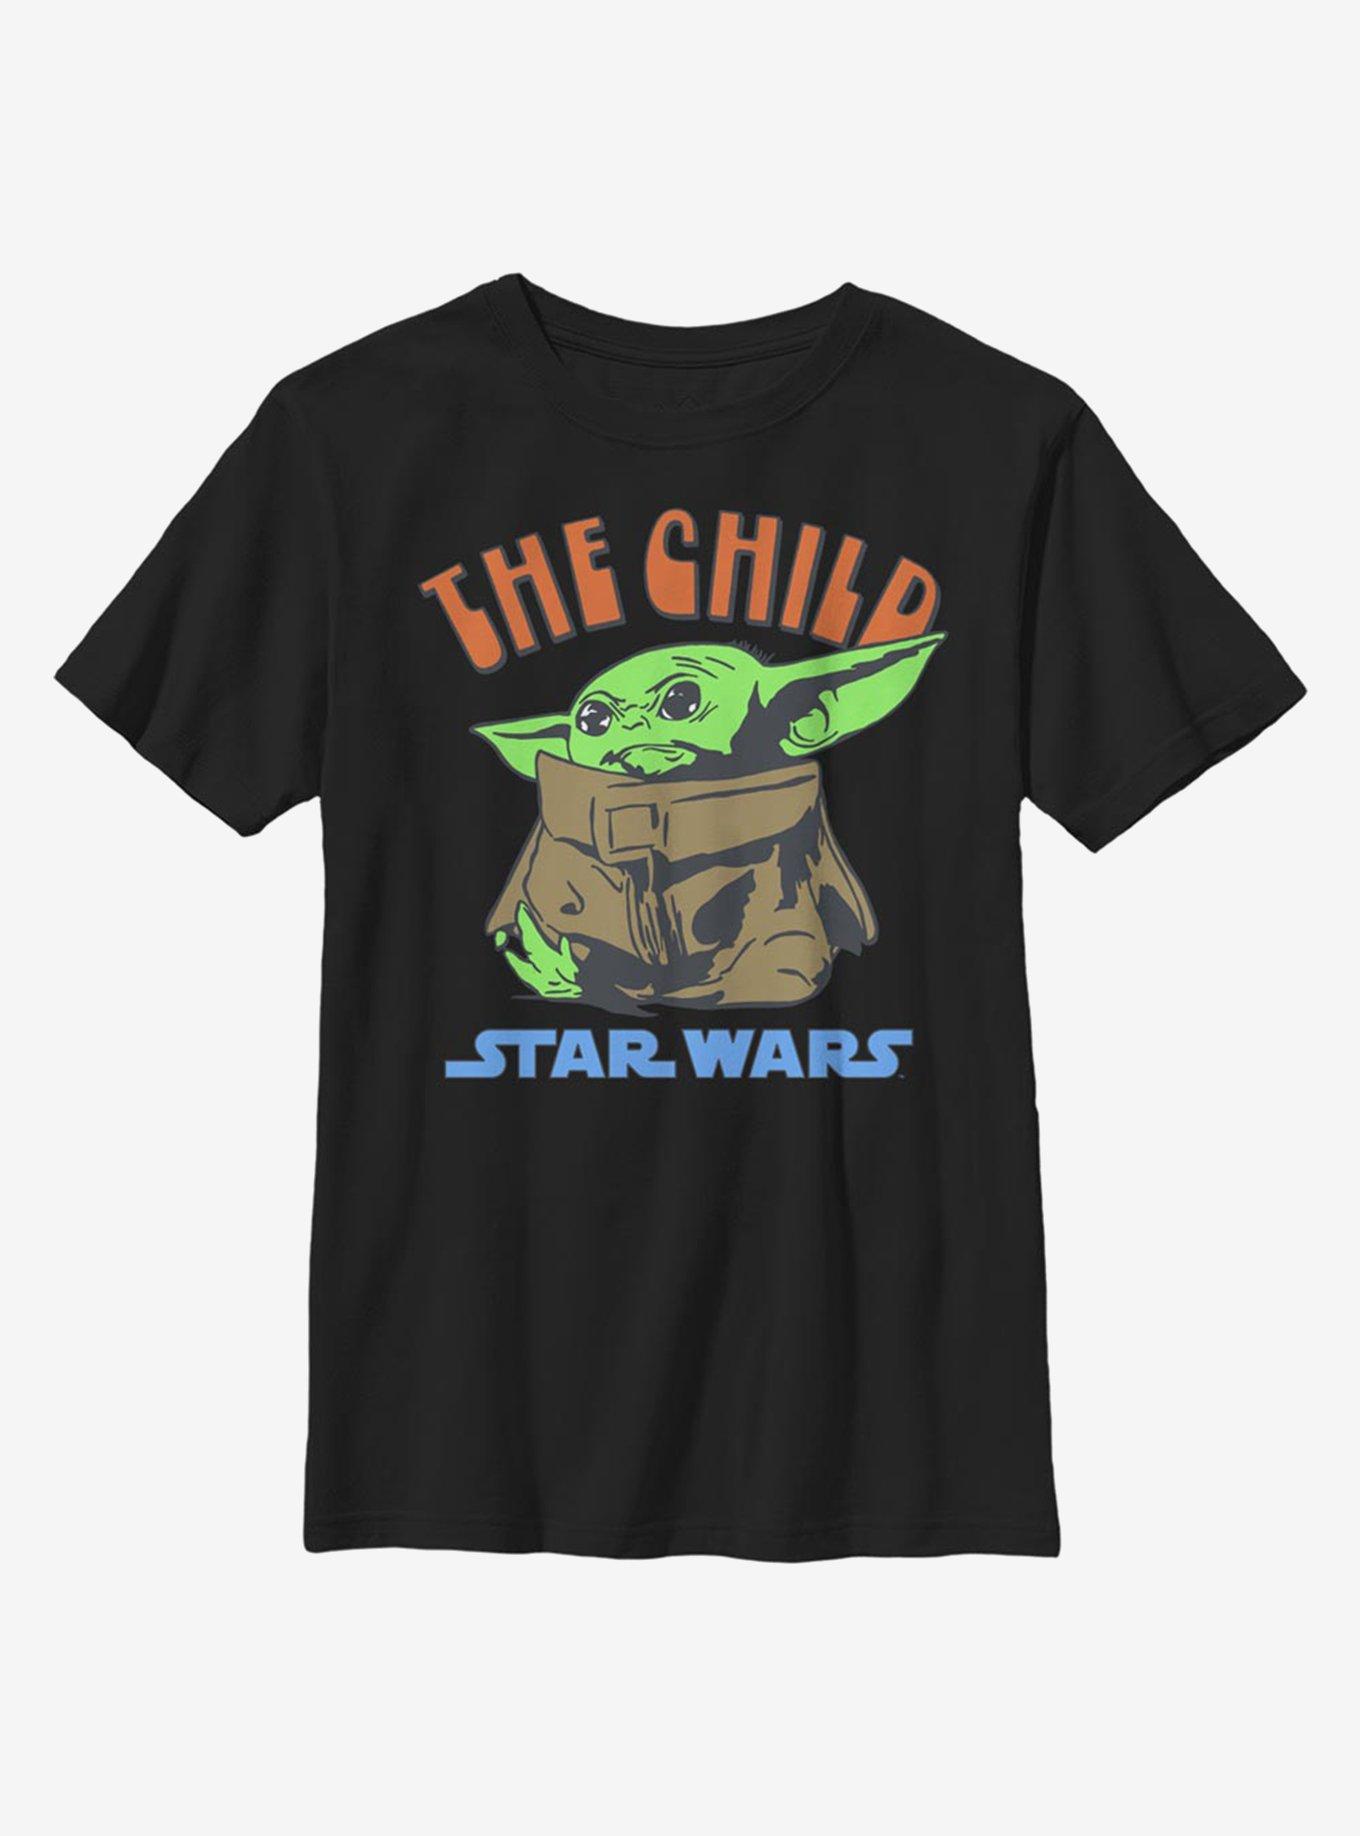 Star Wars The Mandalorian The Child Bright Letters Youth T-Shirt, BLACK, hi-res